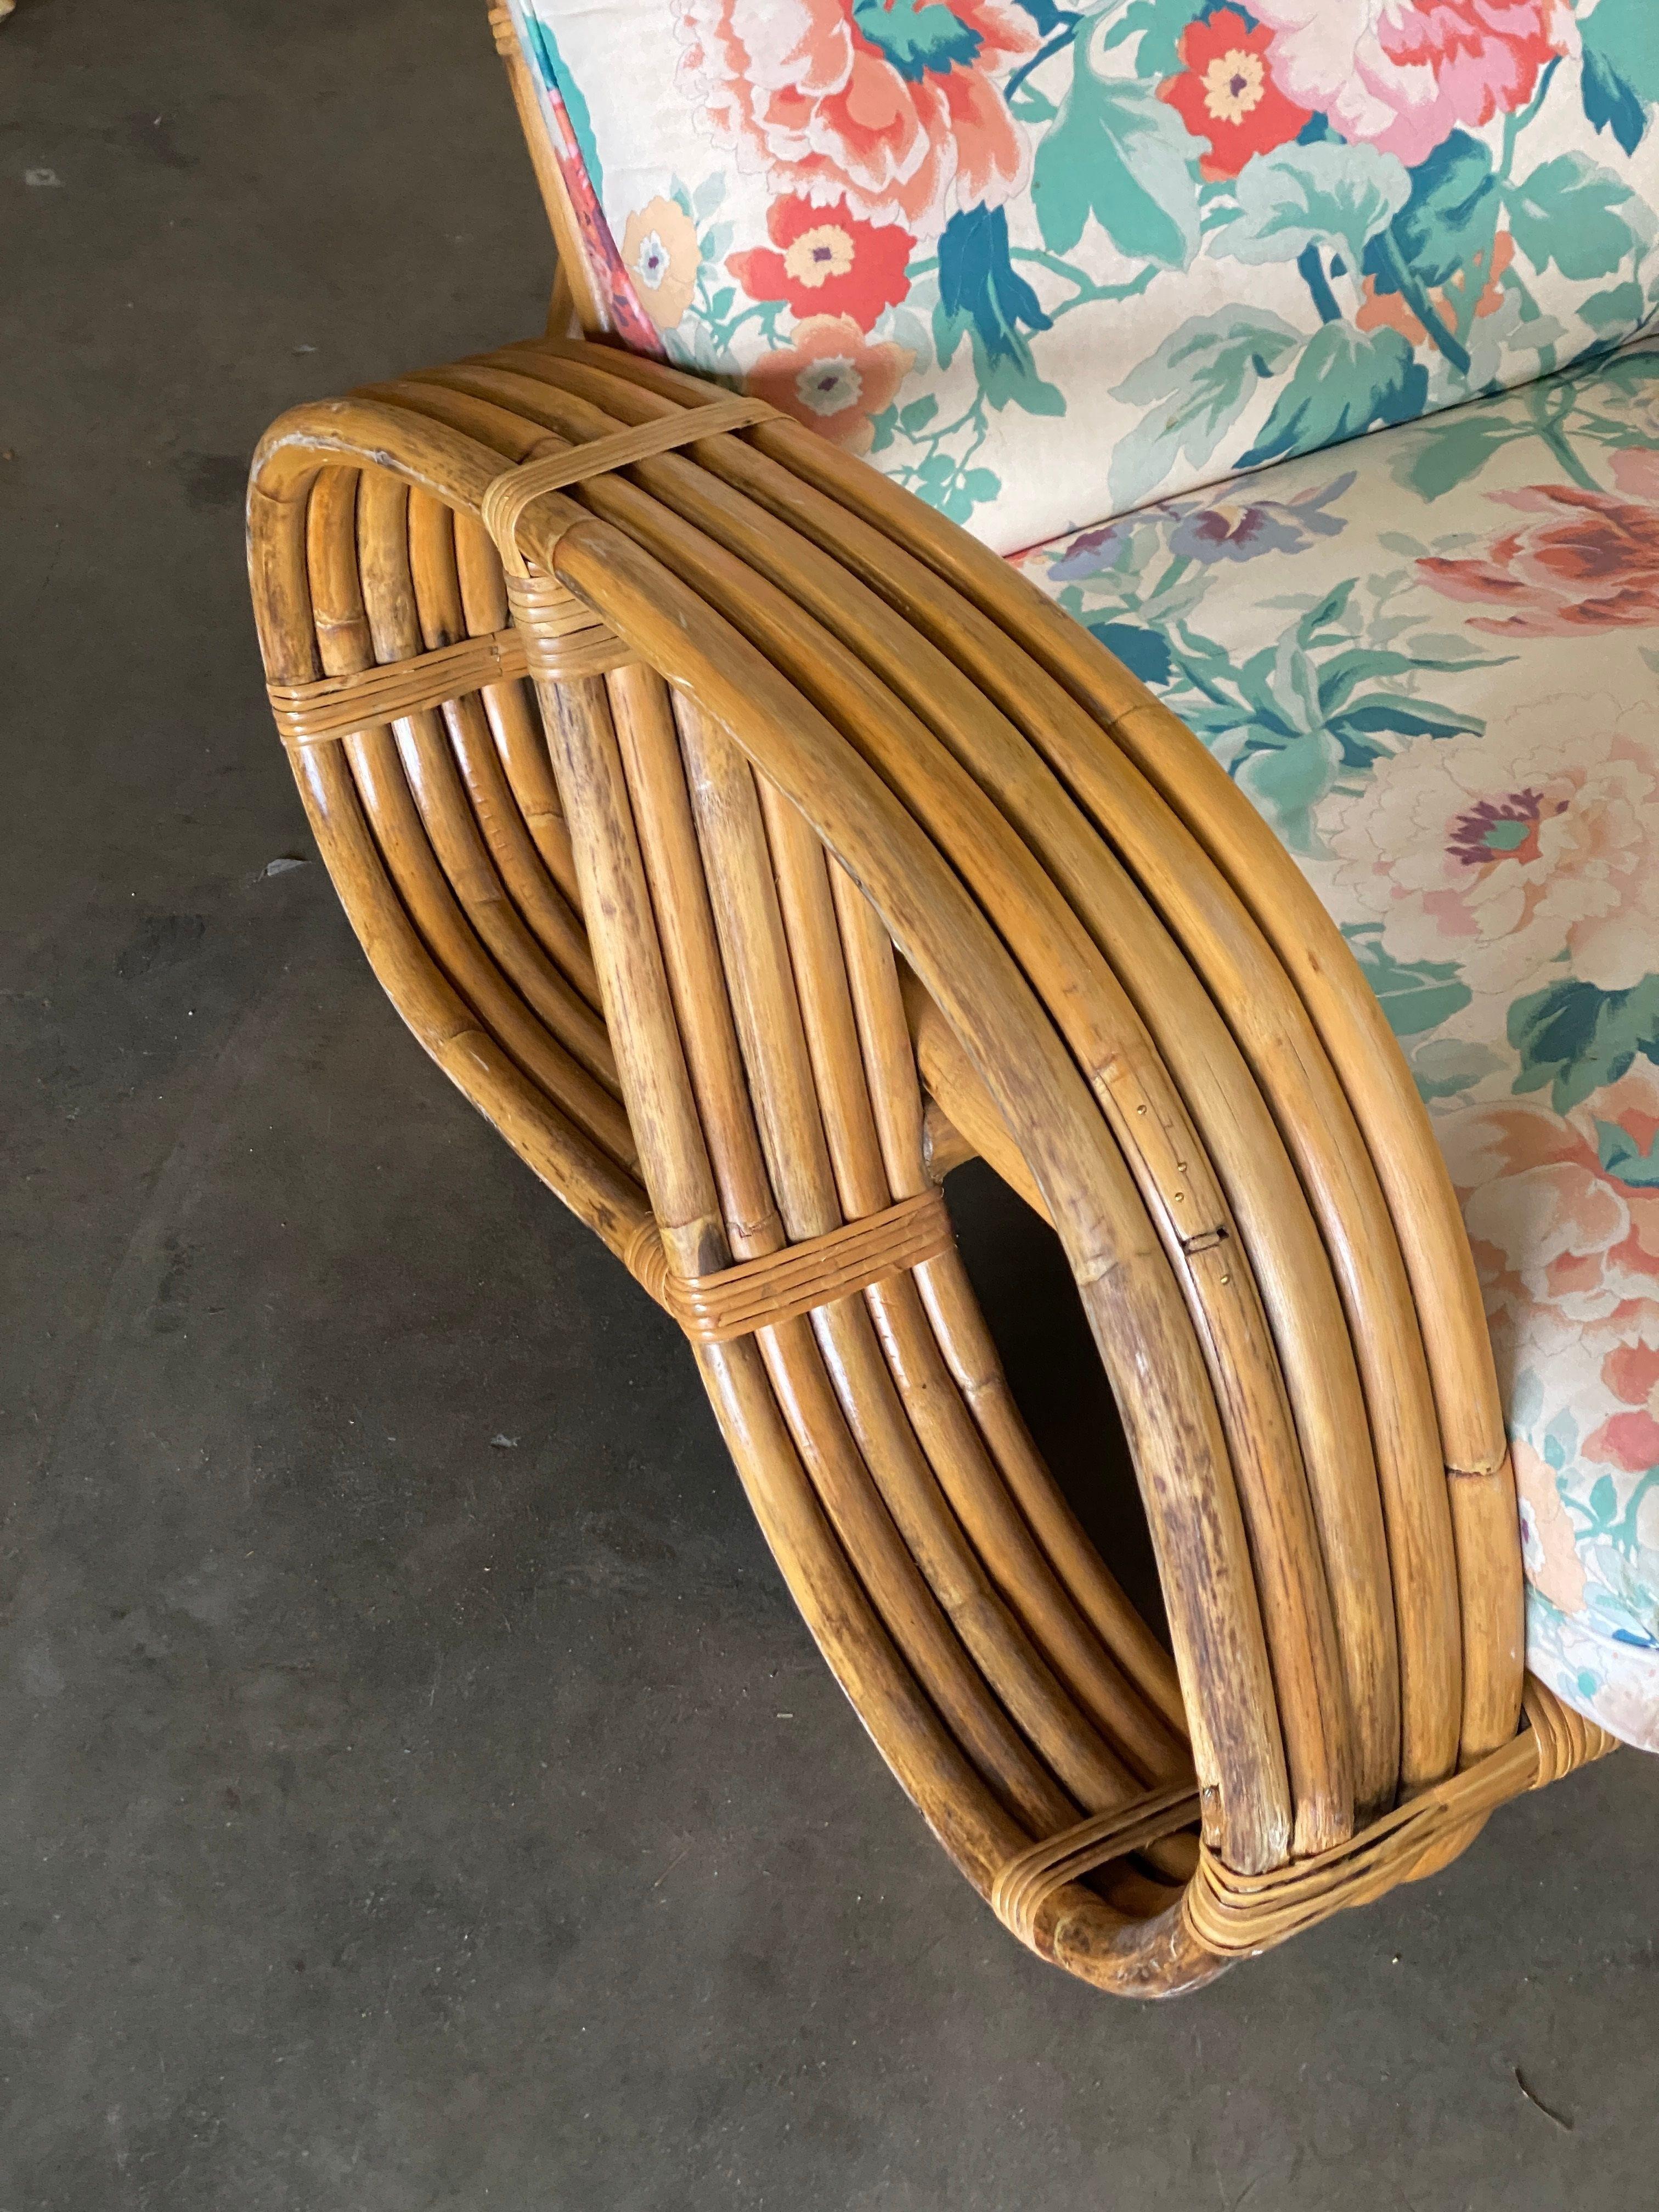 Four-strand 3/4 reverse pretzel rattan sofa and five-strand lounge chair set both feature a decorative wave detail on the base.  Reminiscent of the sofas done by Paul Frankl in the 1940s. 

Sofa: 28